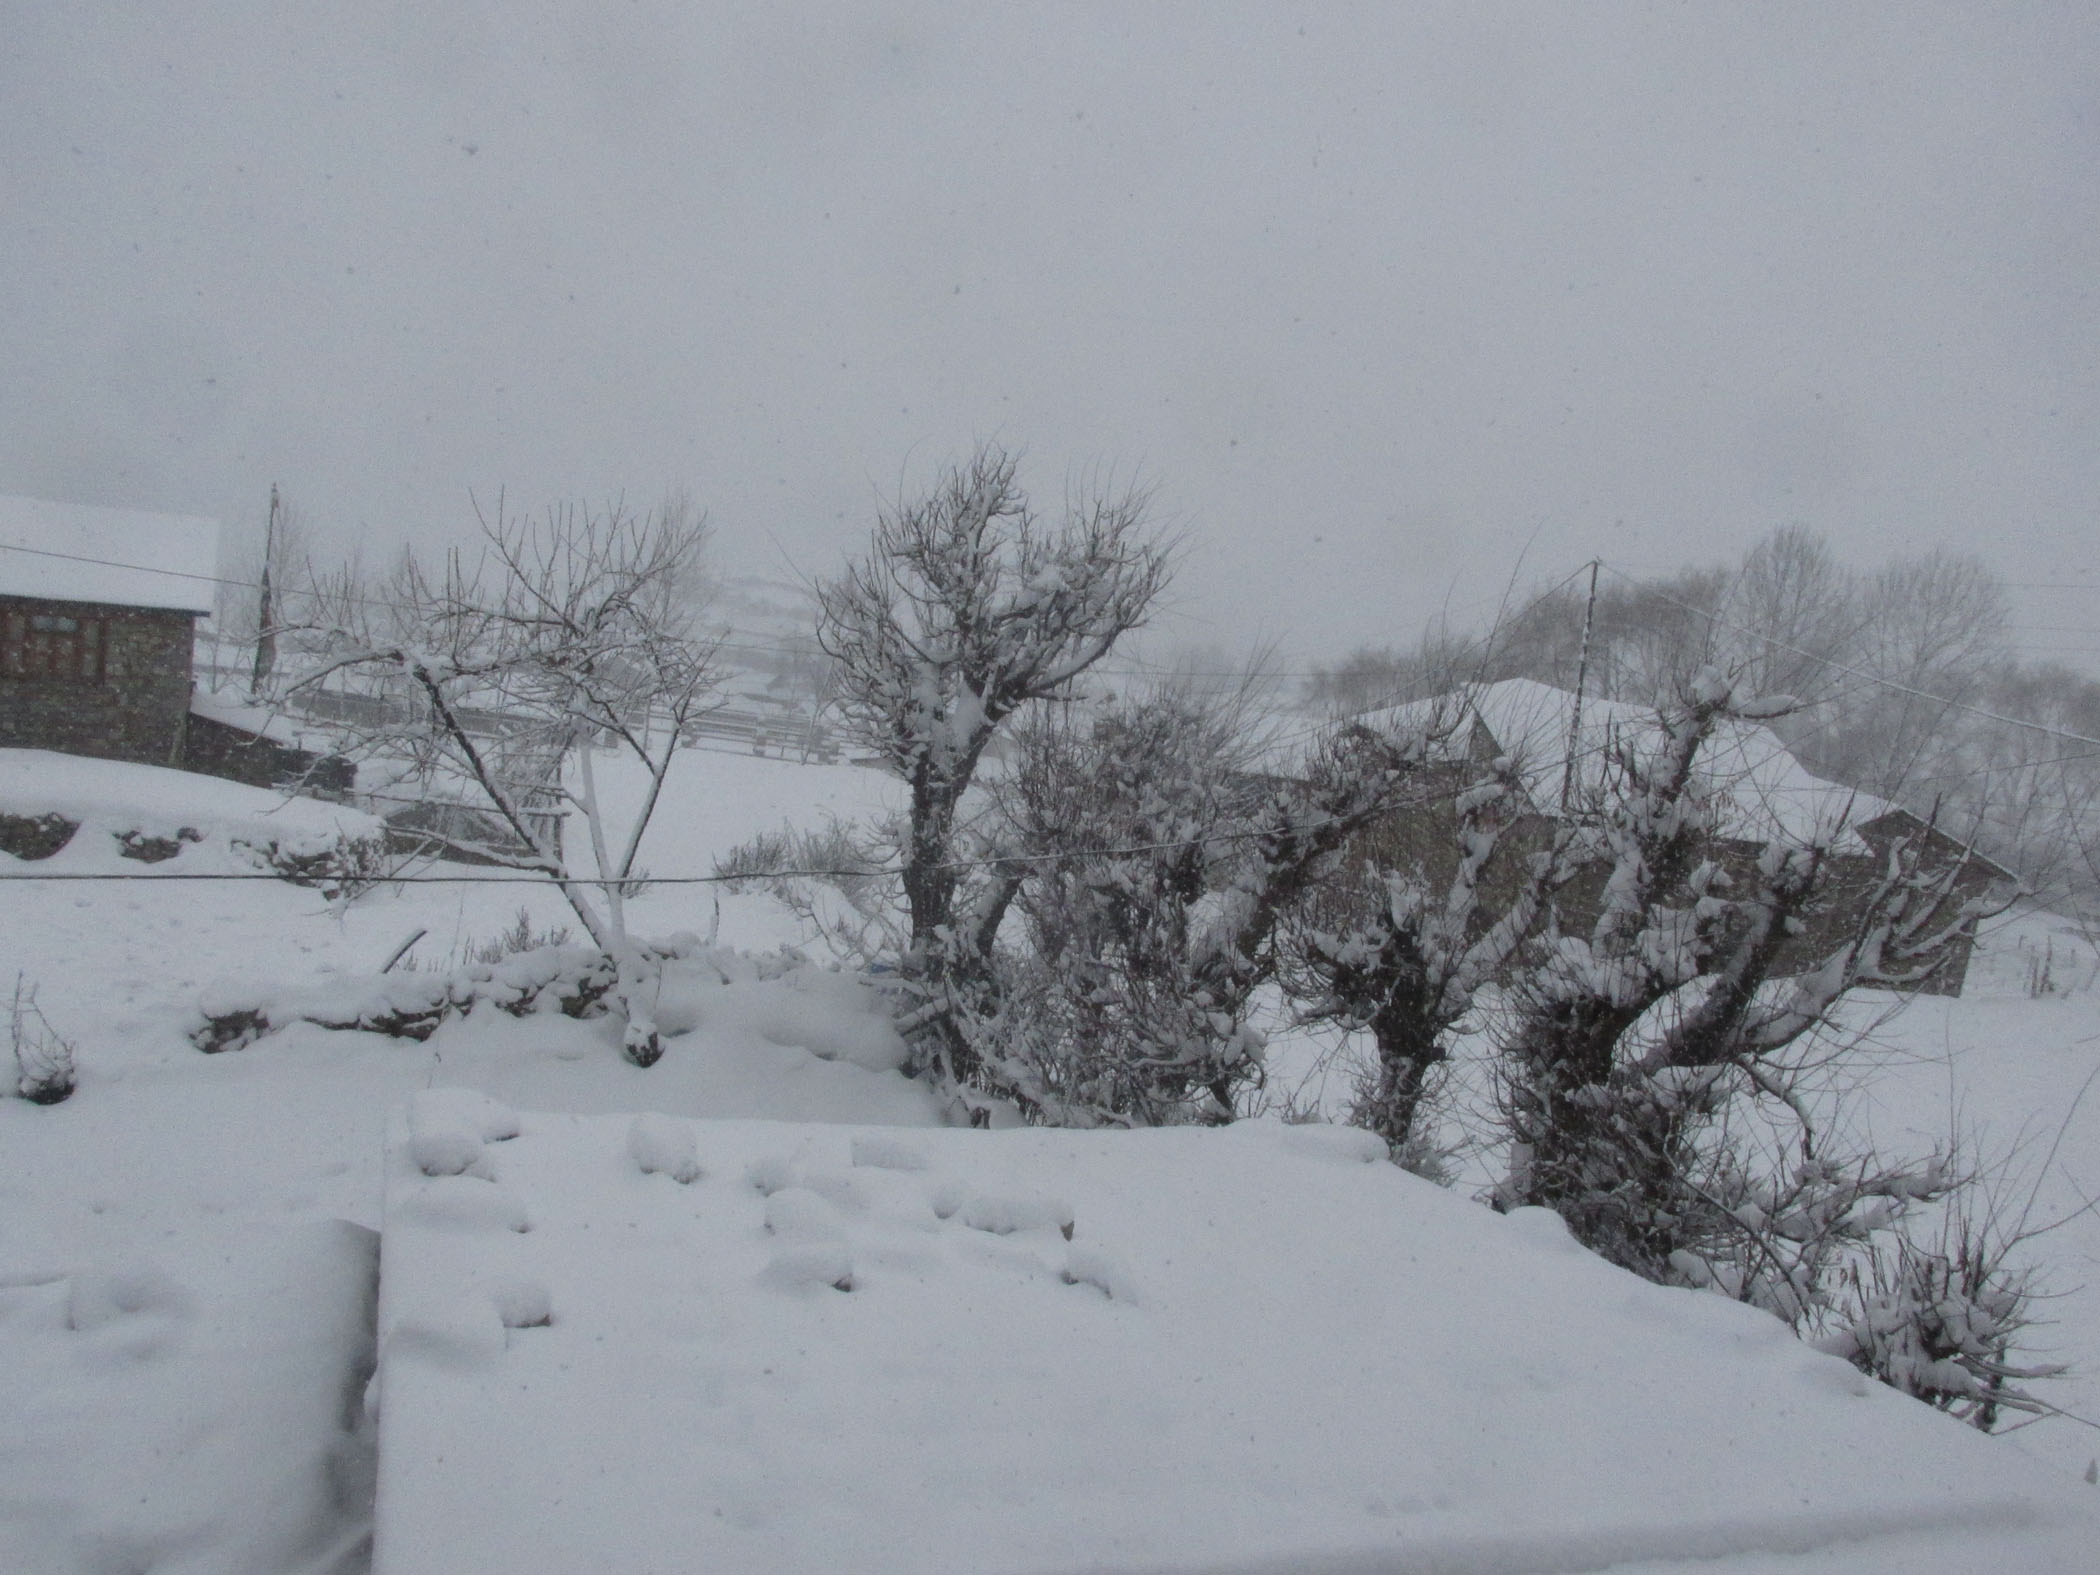 Snowfall affects collection of yarsagumba in Manang